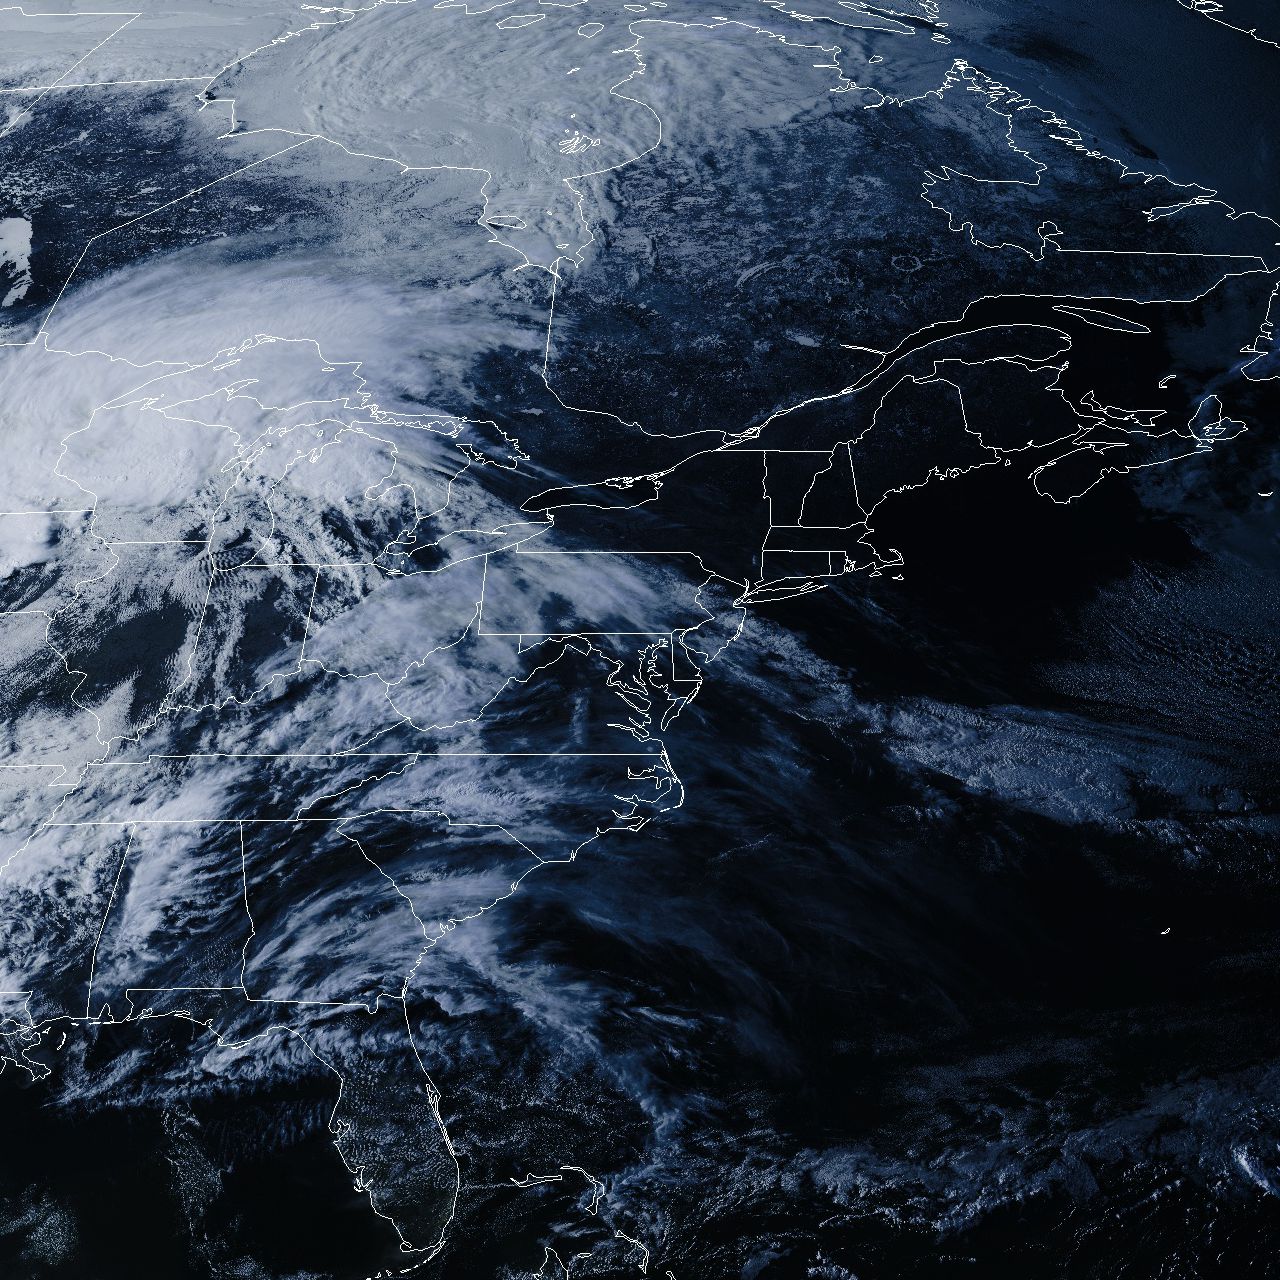 False color image from GOES 16, cropped to show full resolution.